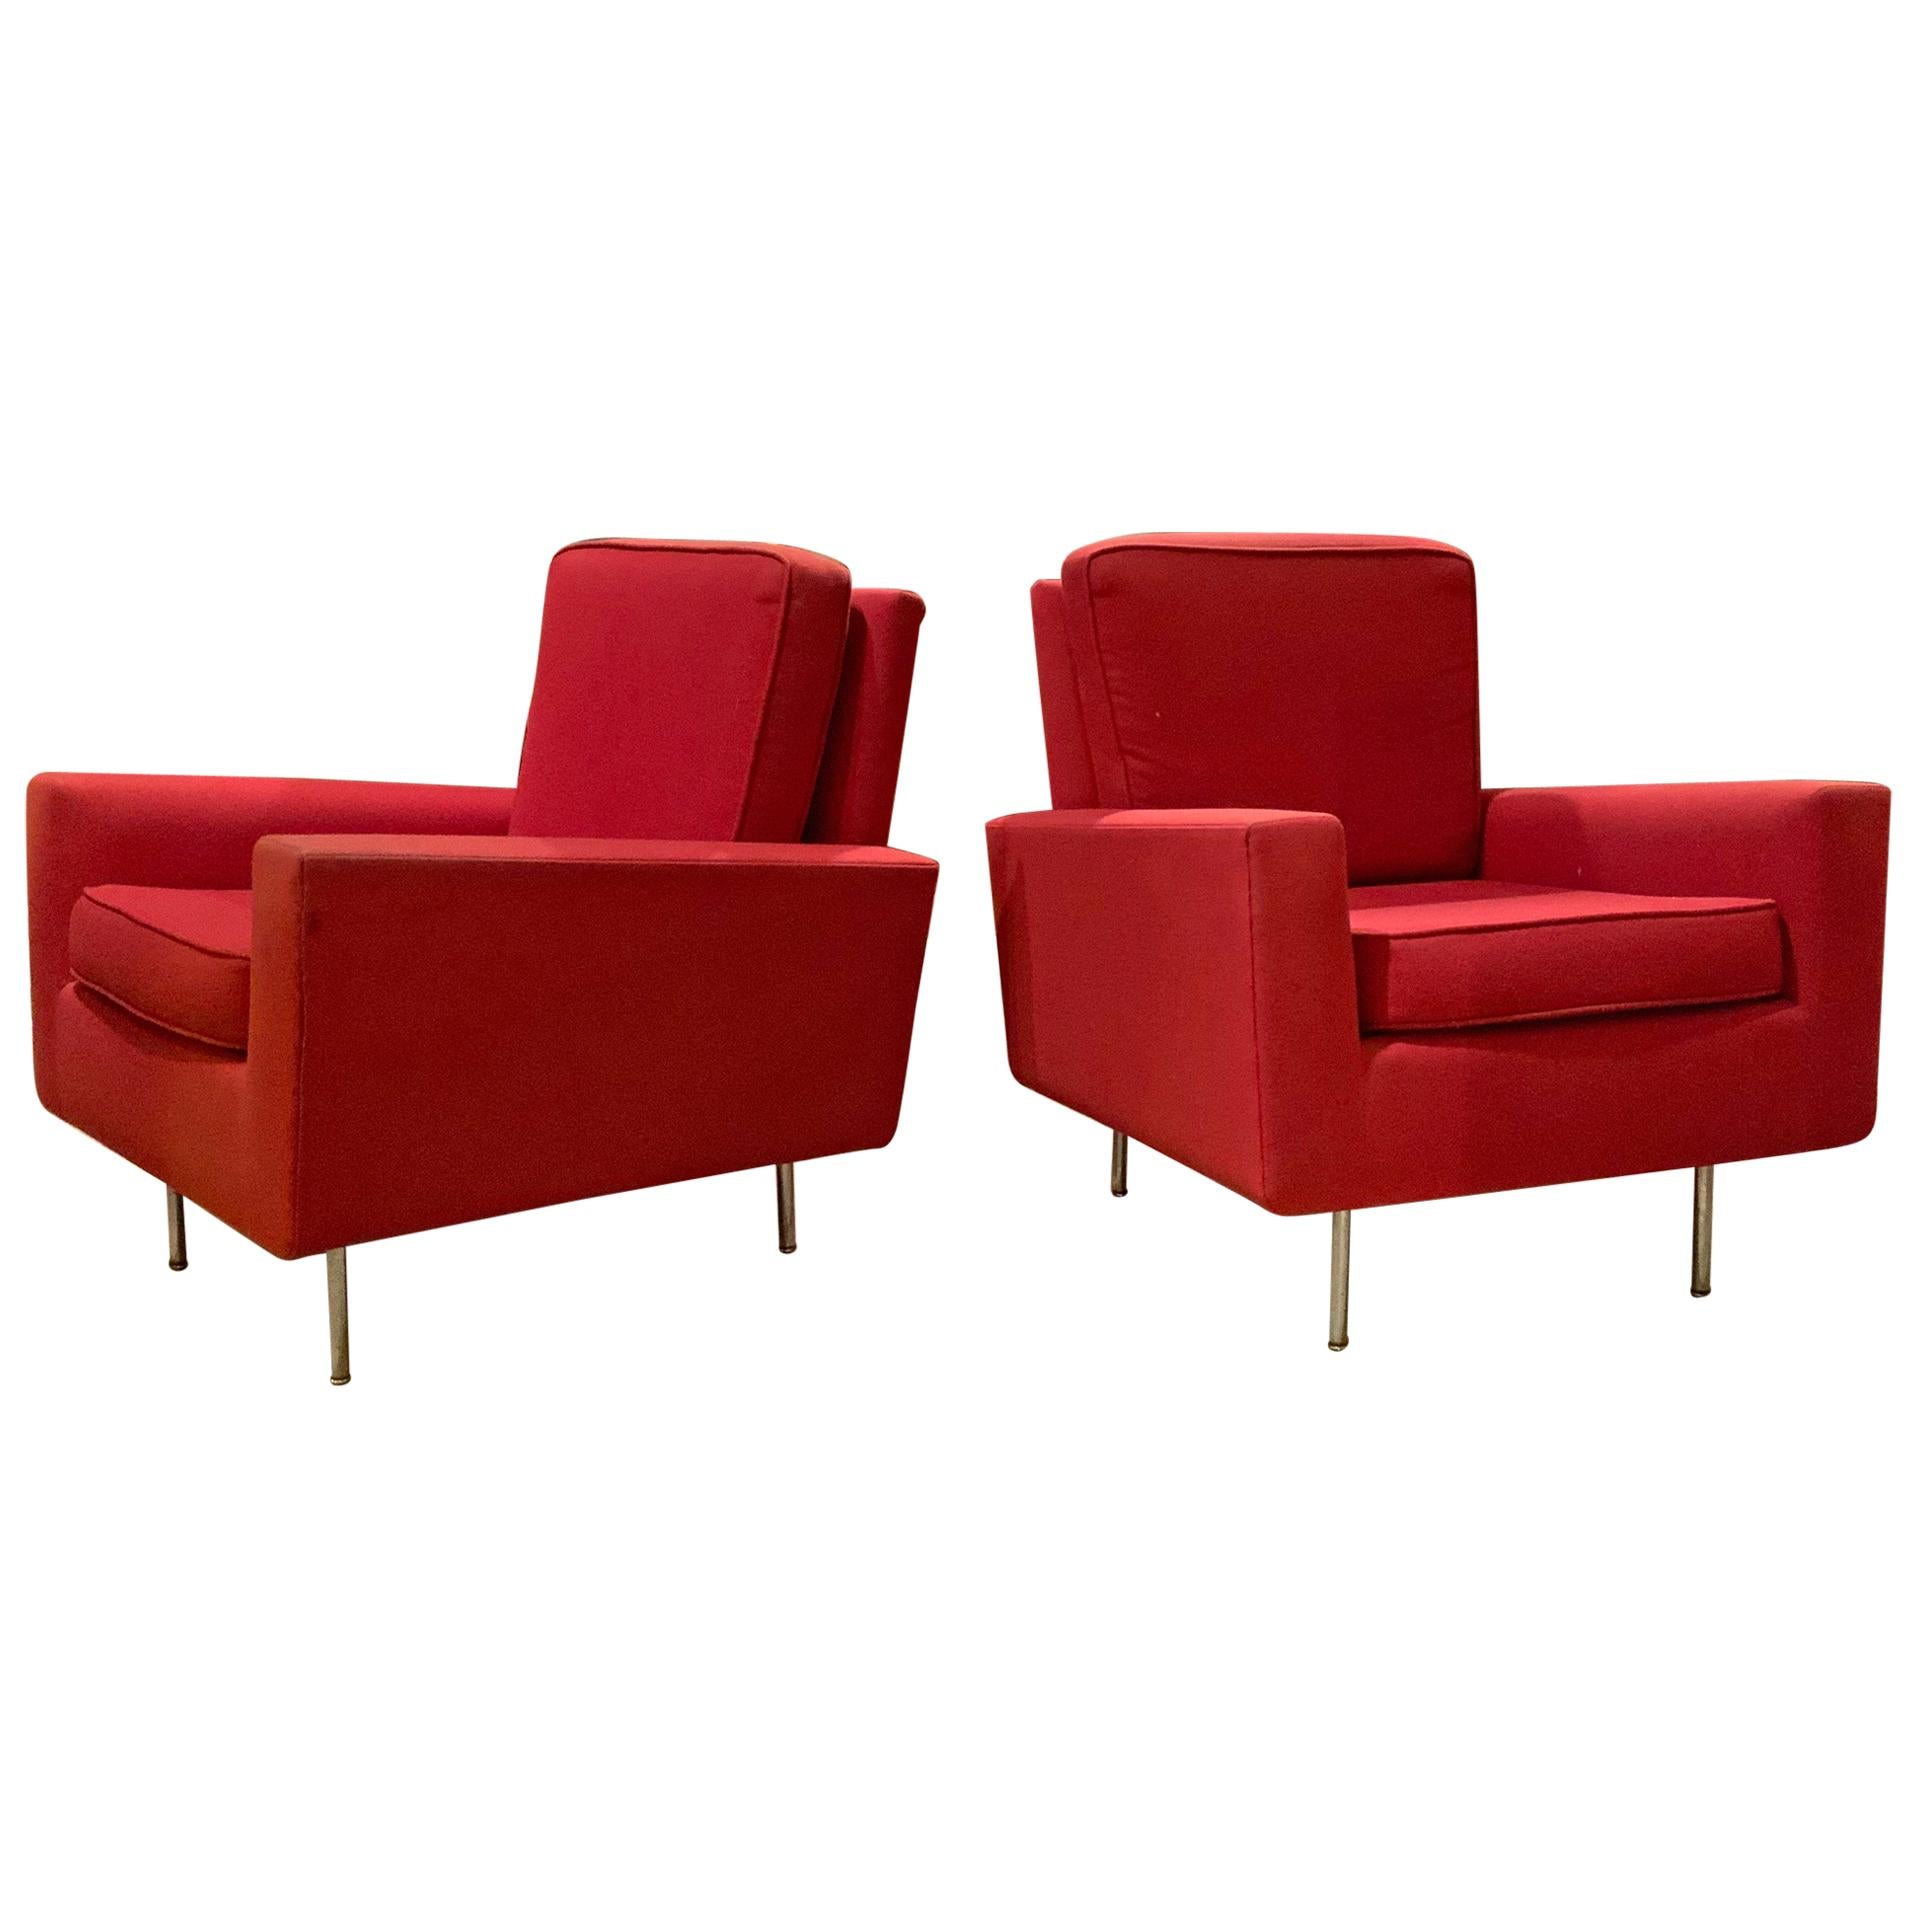 Pair of 1950s Club Chairs by Florence Knoll